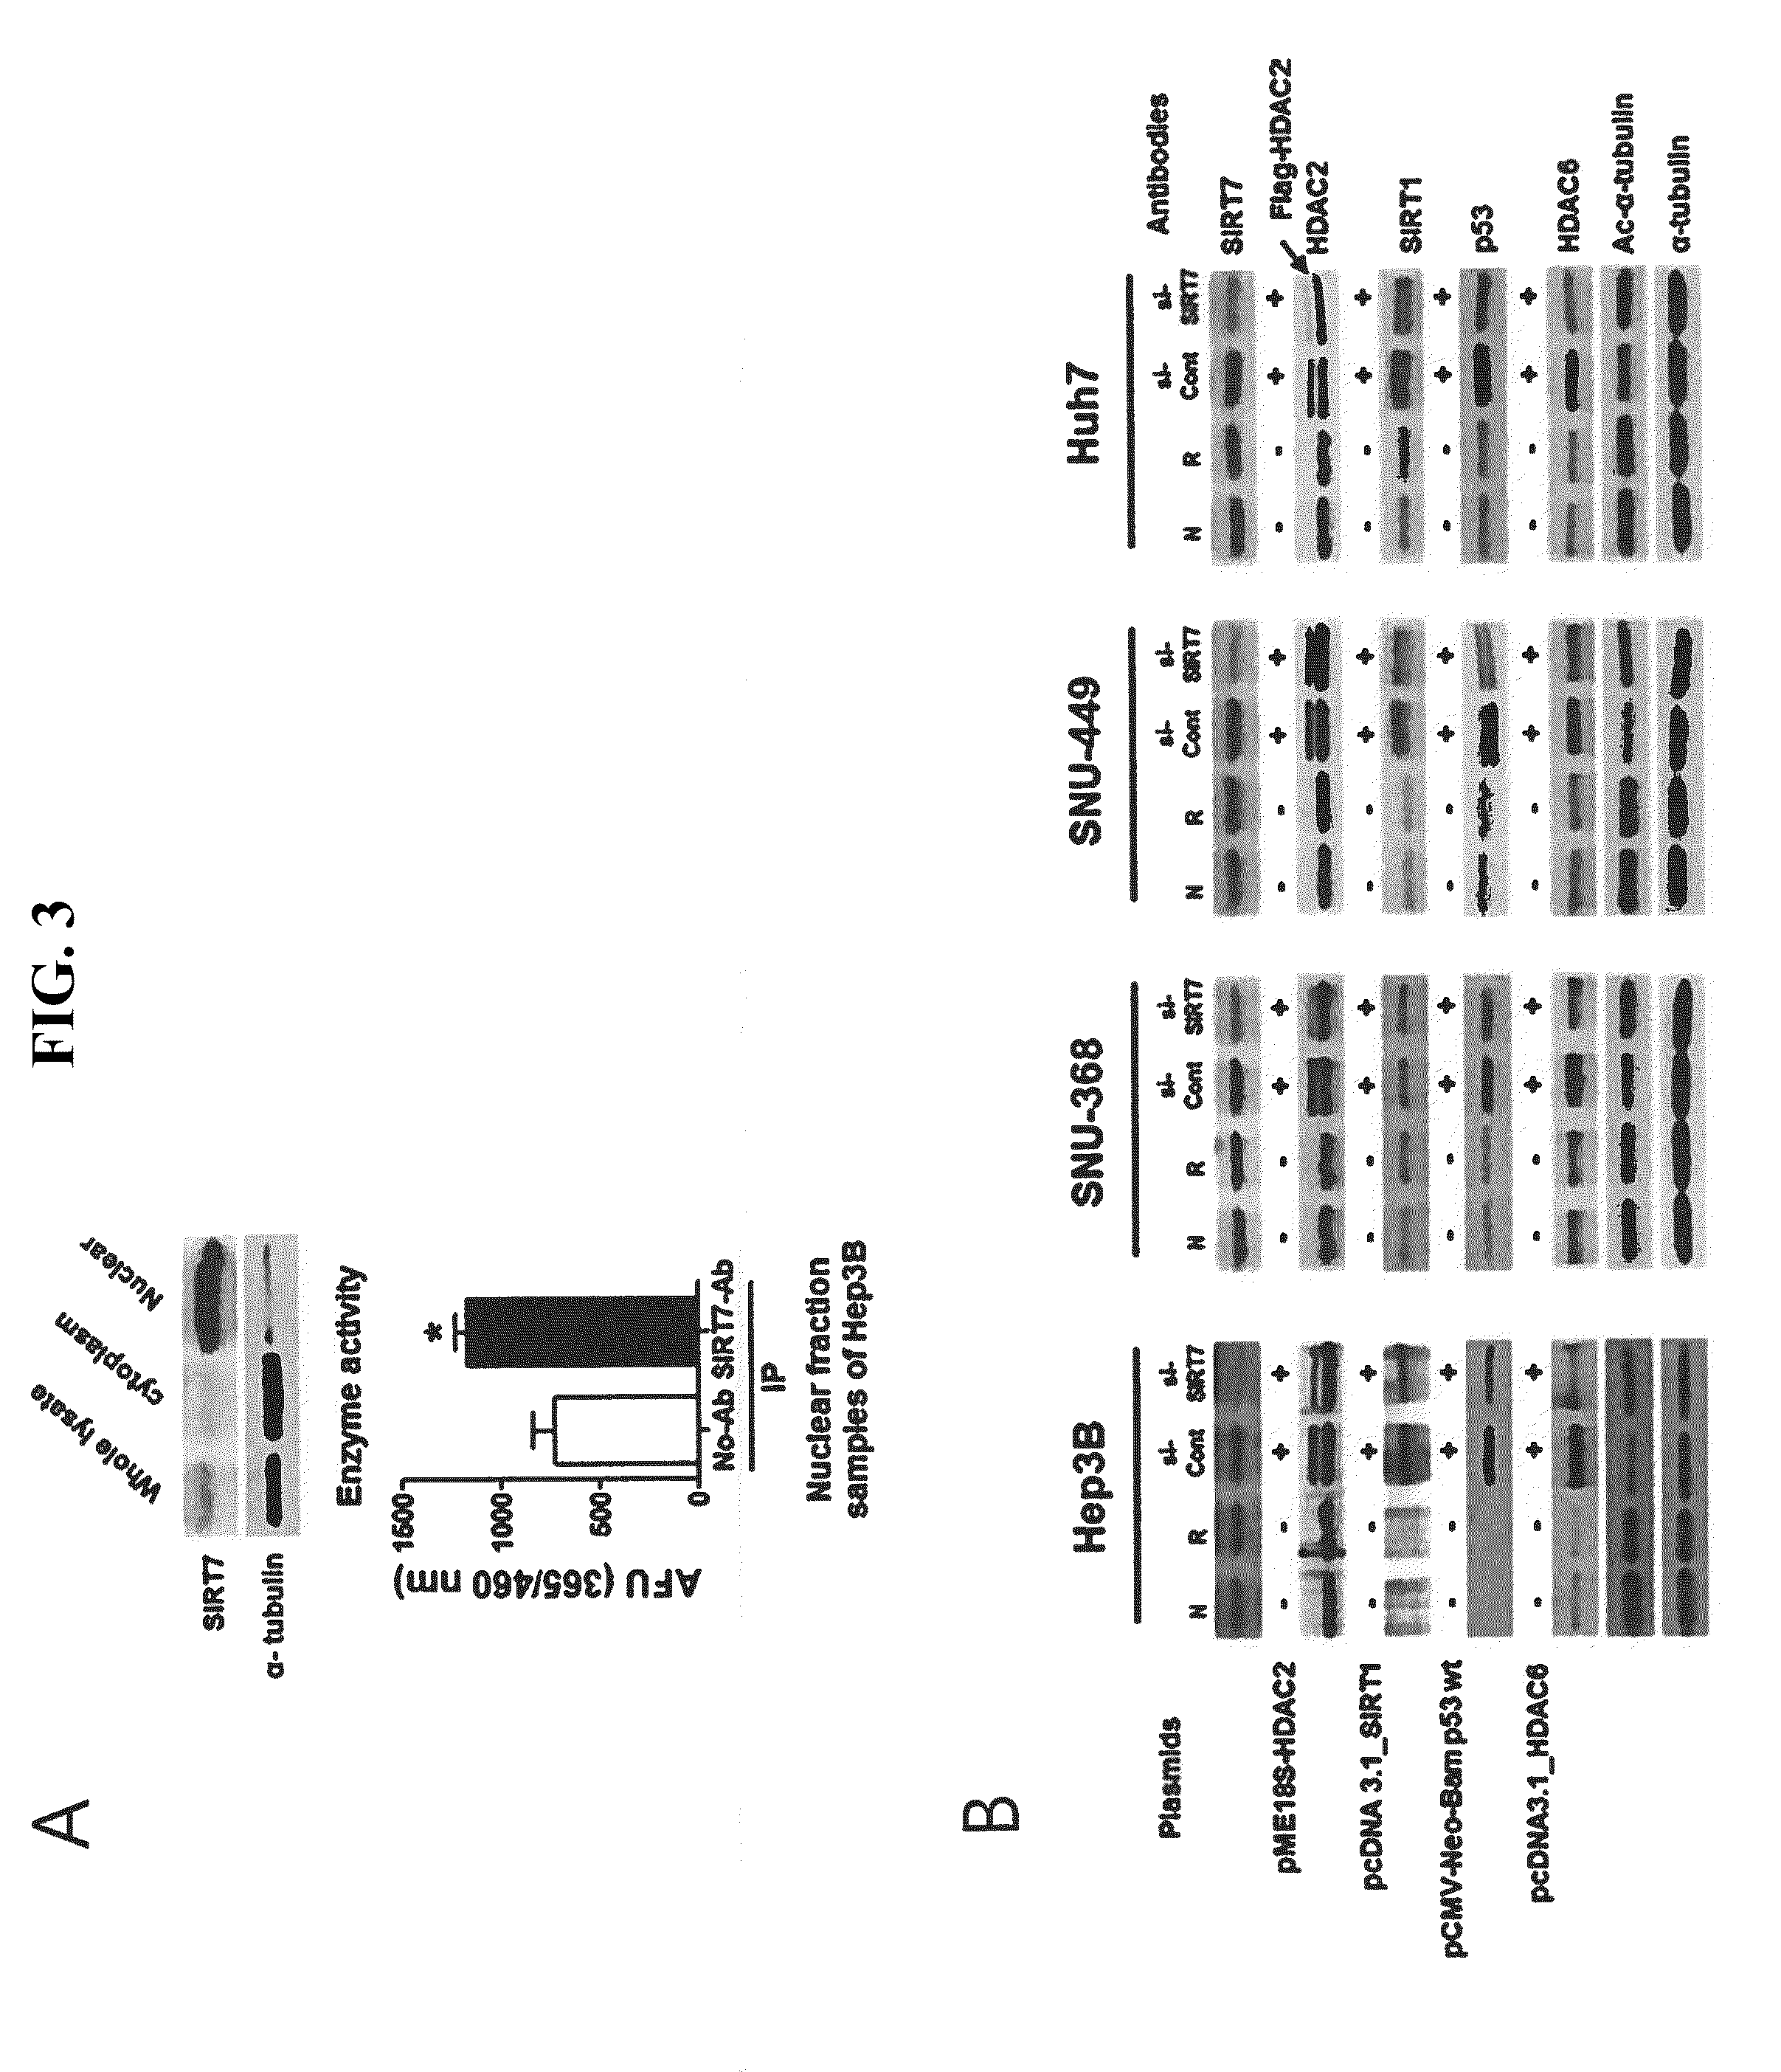 Use of SIRT7 as novel cancer therapy target and method for treating cancer using the same